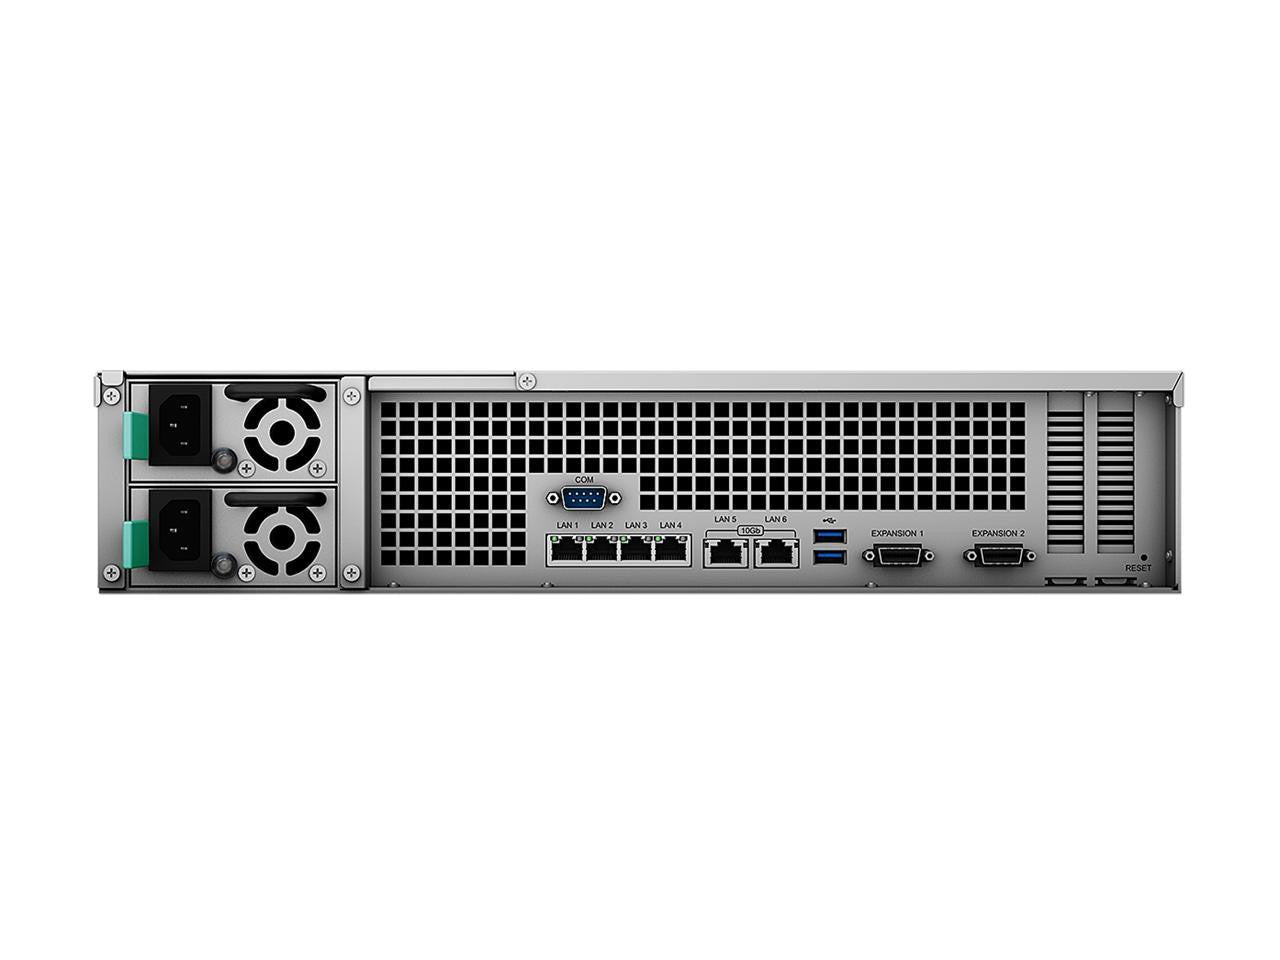 RS3621xs+ 12-BAY RackStation with 16GB RAM and 144TB (12 x 12TB) of Synology Enterprise Drives